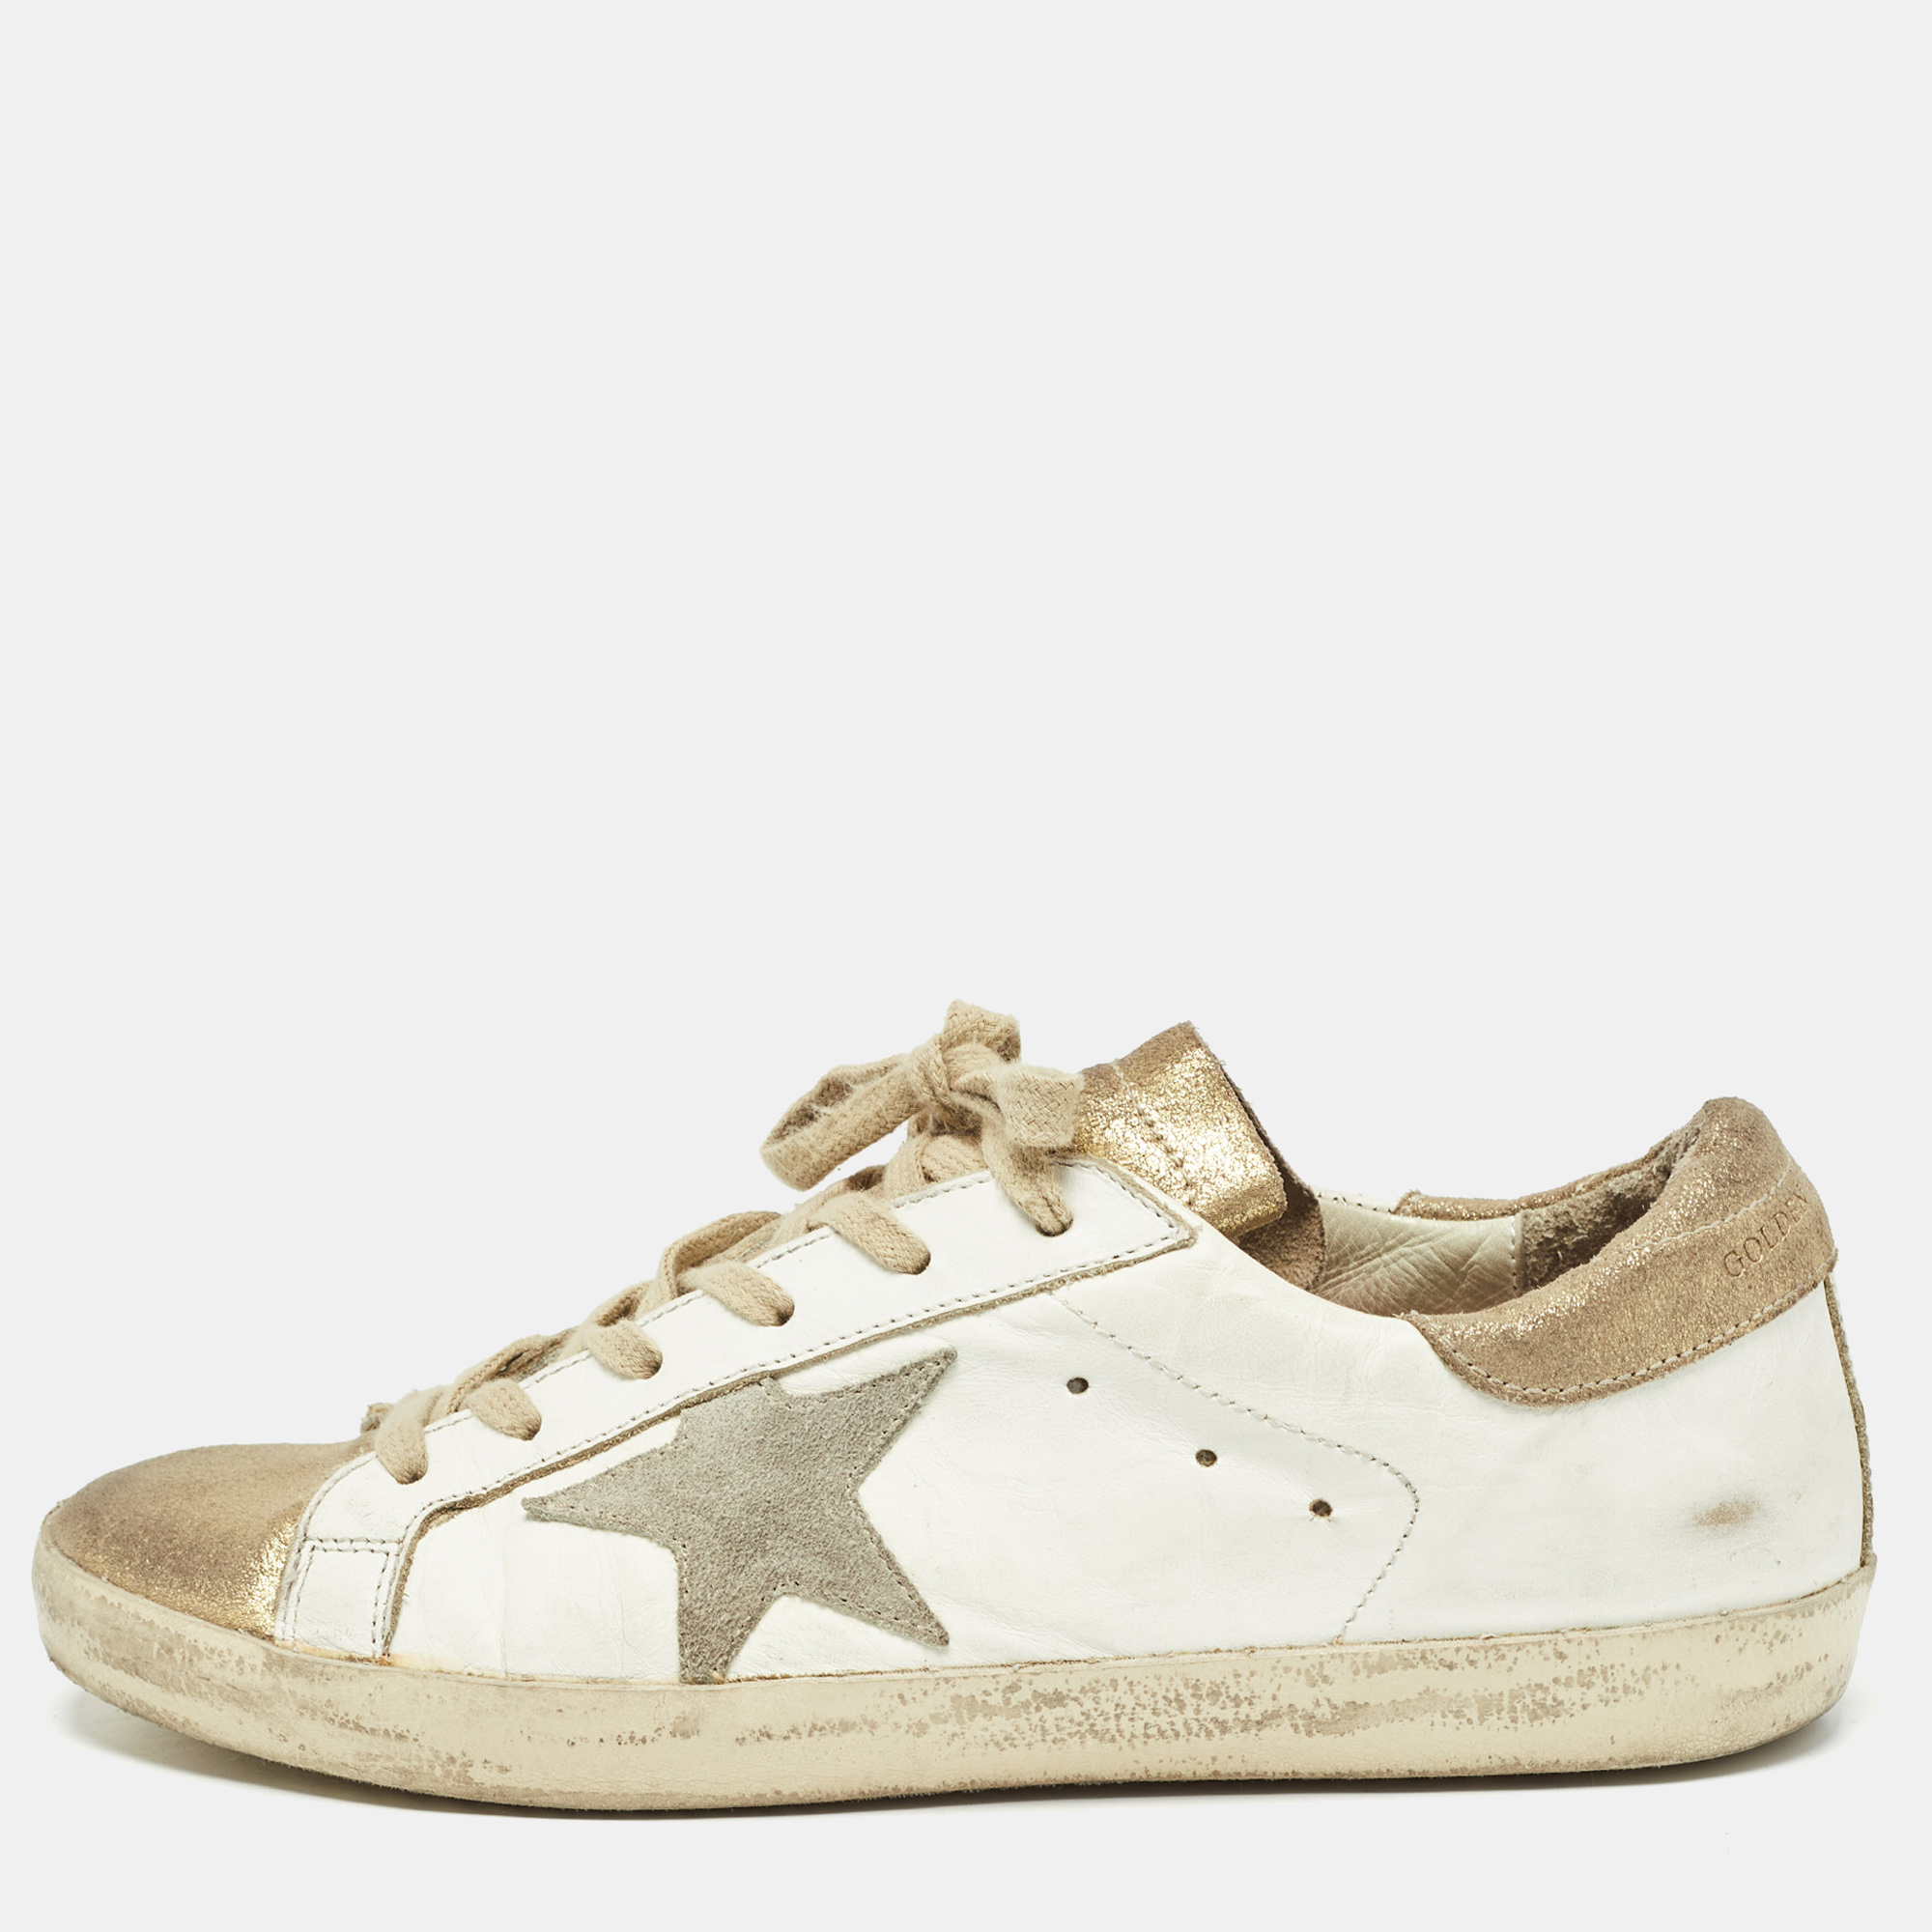 Golden goose white/gold leather superstar sneakers size 39